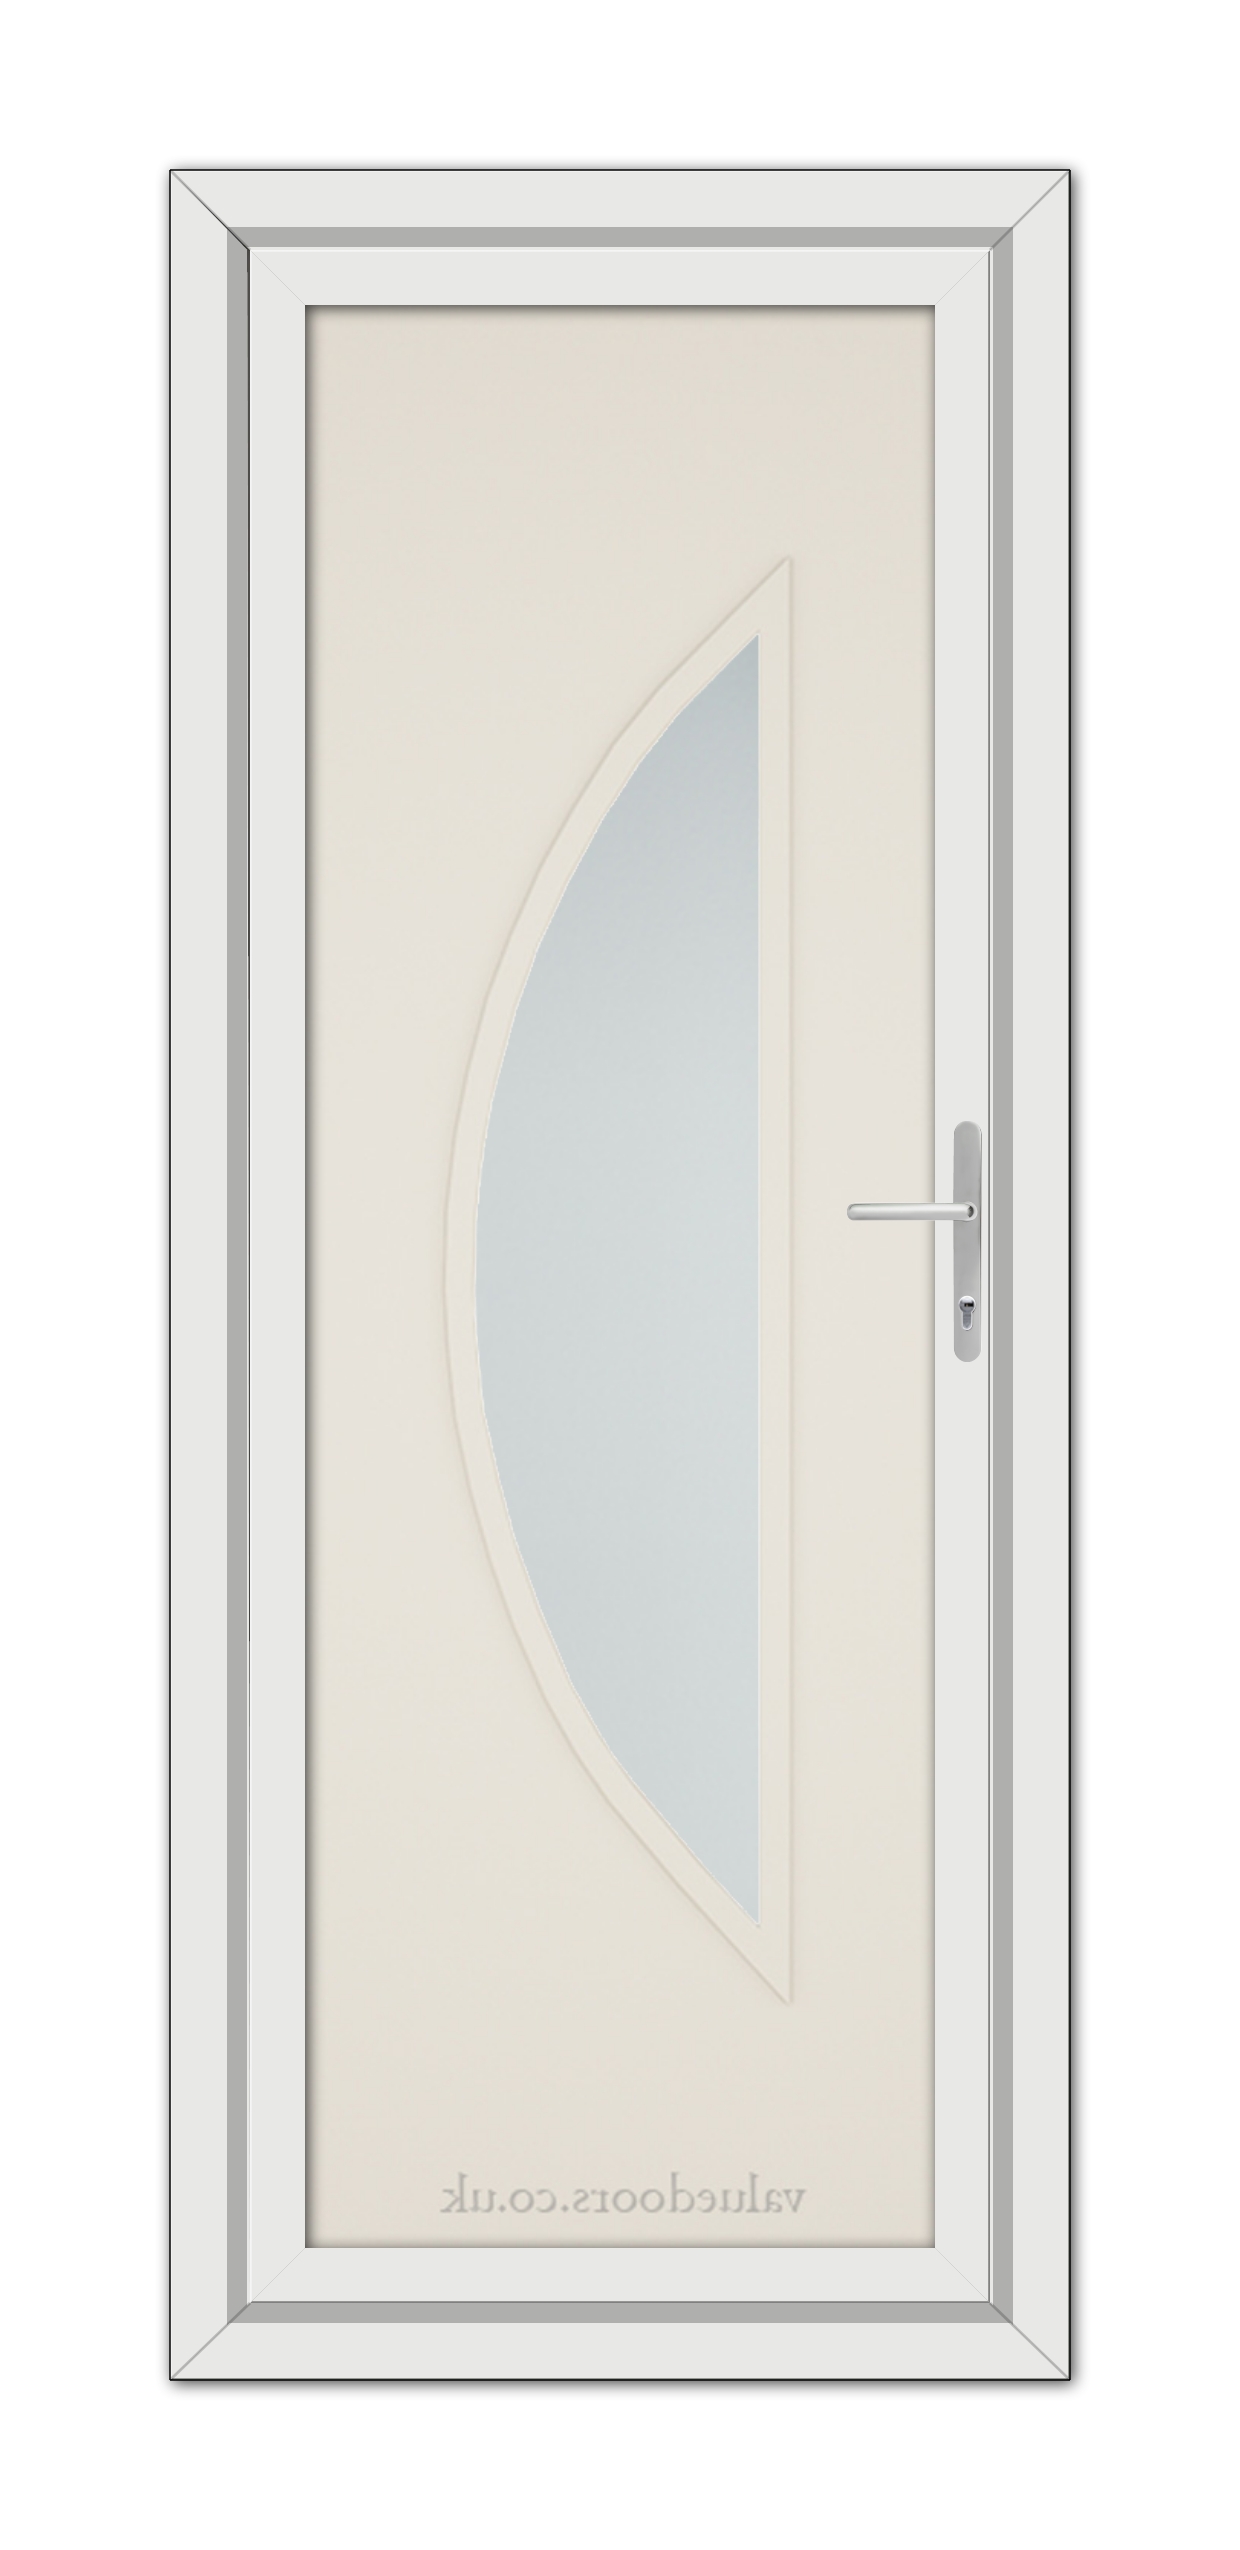 A vertical image of a Cream Modern 5051 uPVC Door with a large, half-oval frosted glass window and a metallic handle.